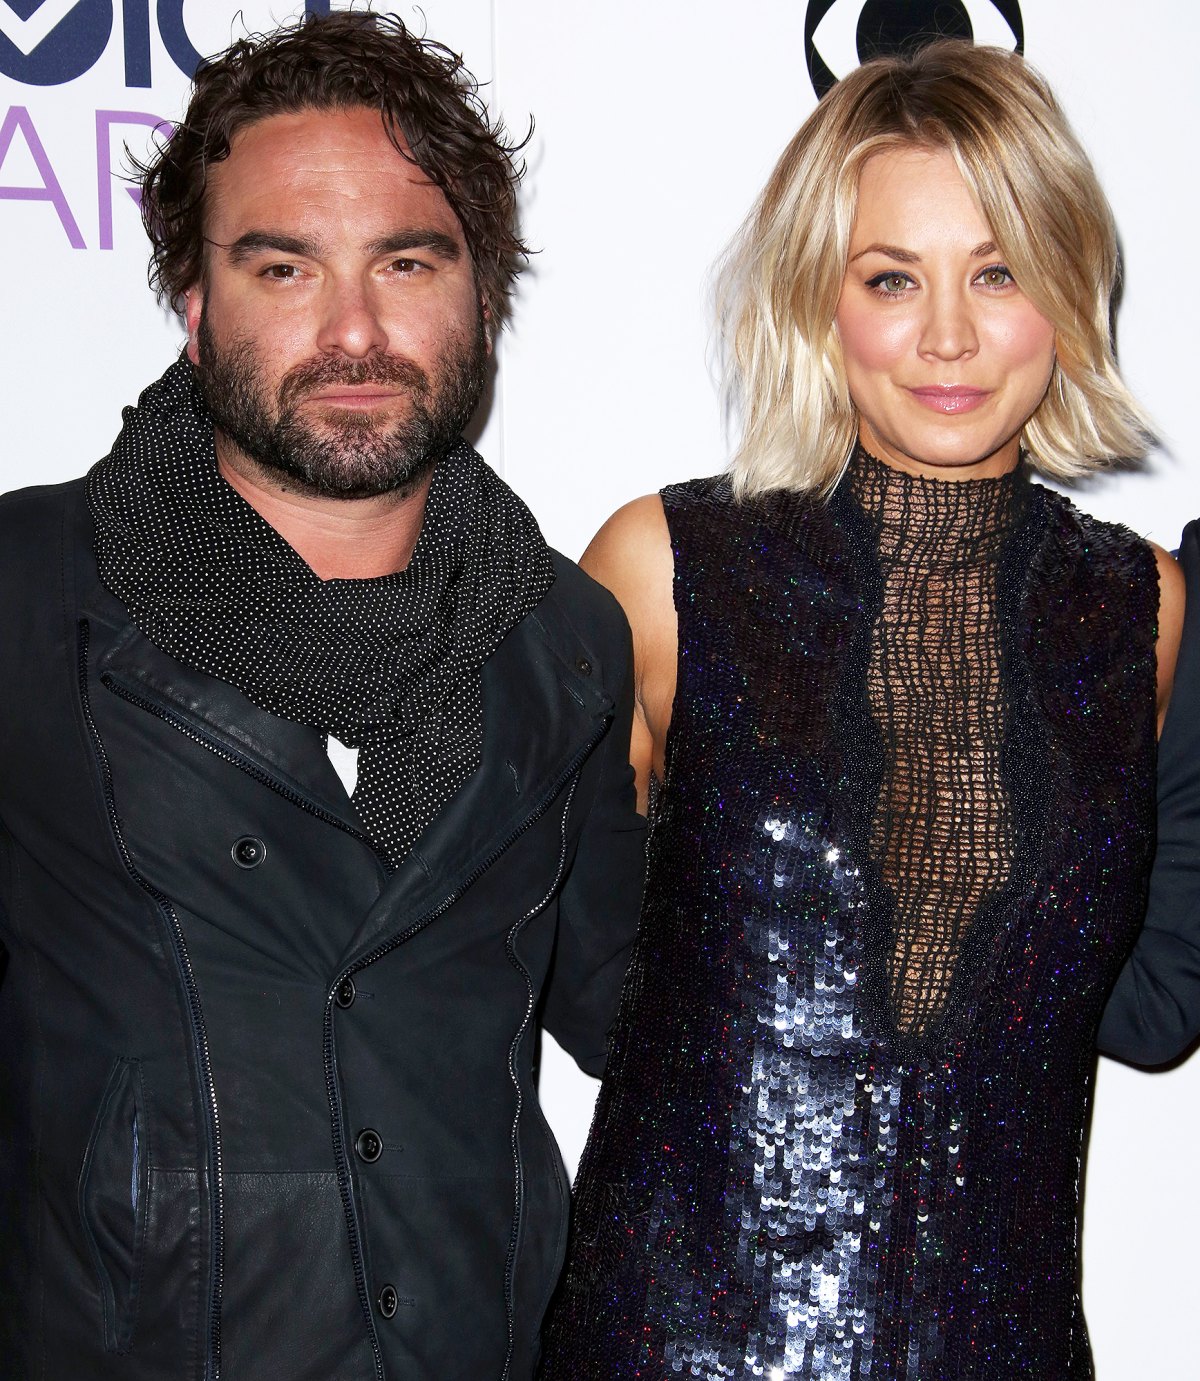 Kaley Cuoco Pussy Porn - Kaley Cuoco and Ex Johnny Galecki's Friendship Through the Years